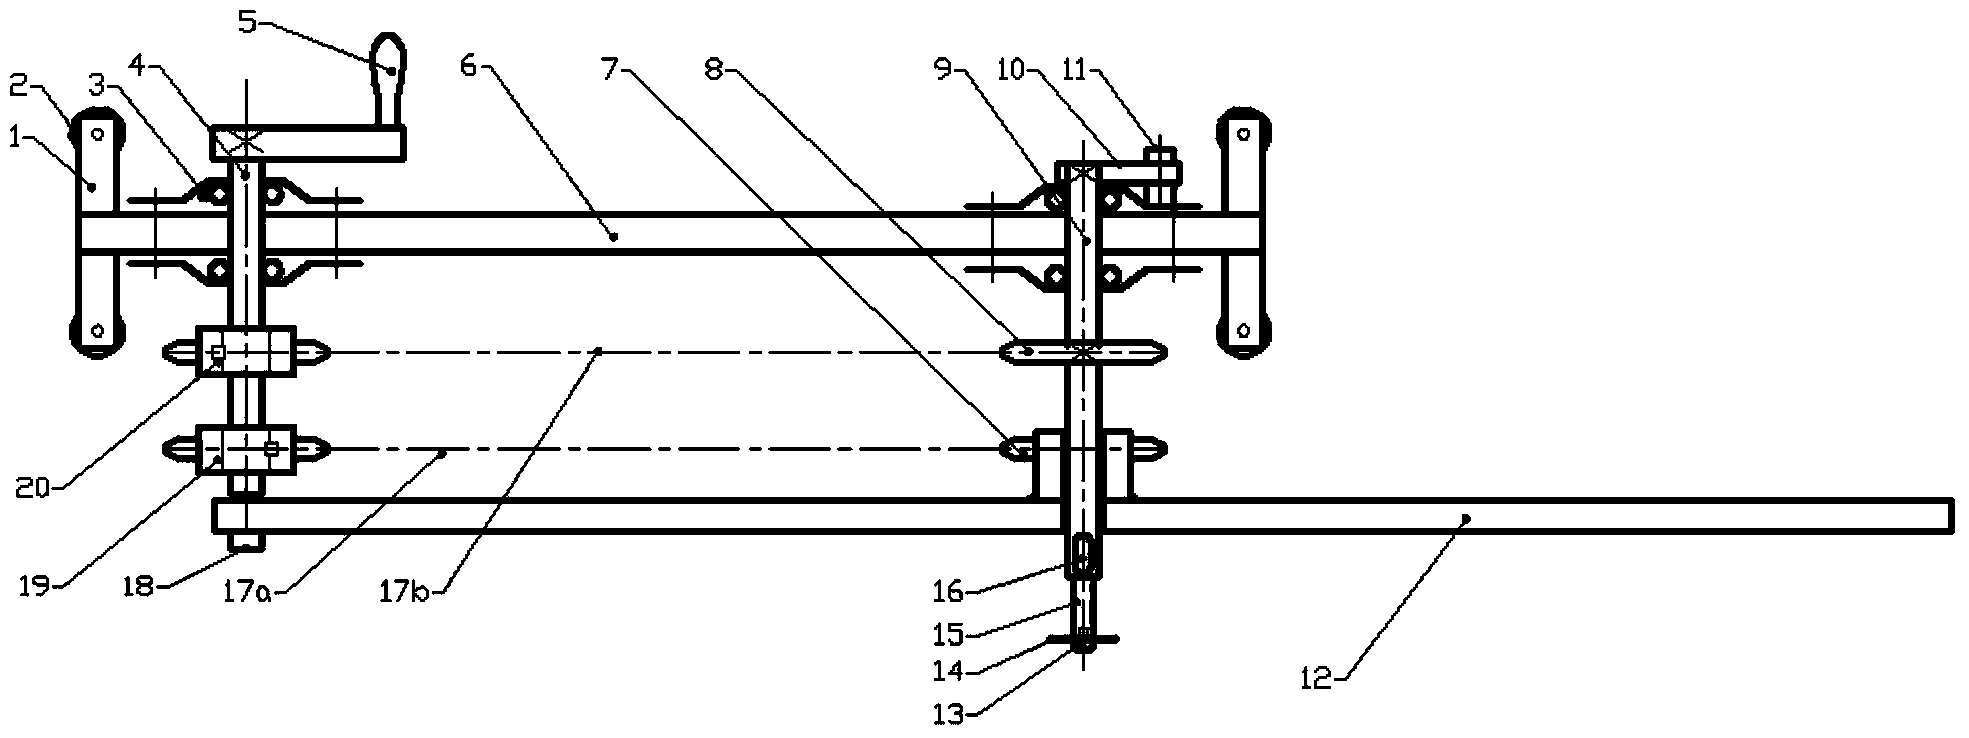 Experimental device and method for mechanisms